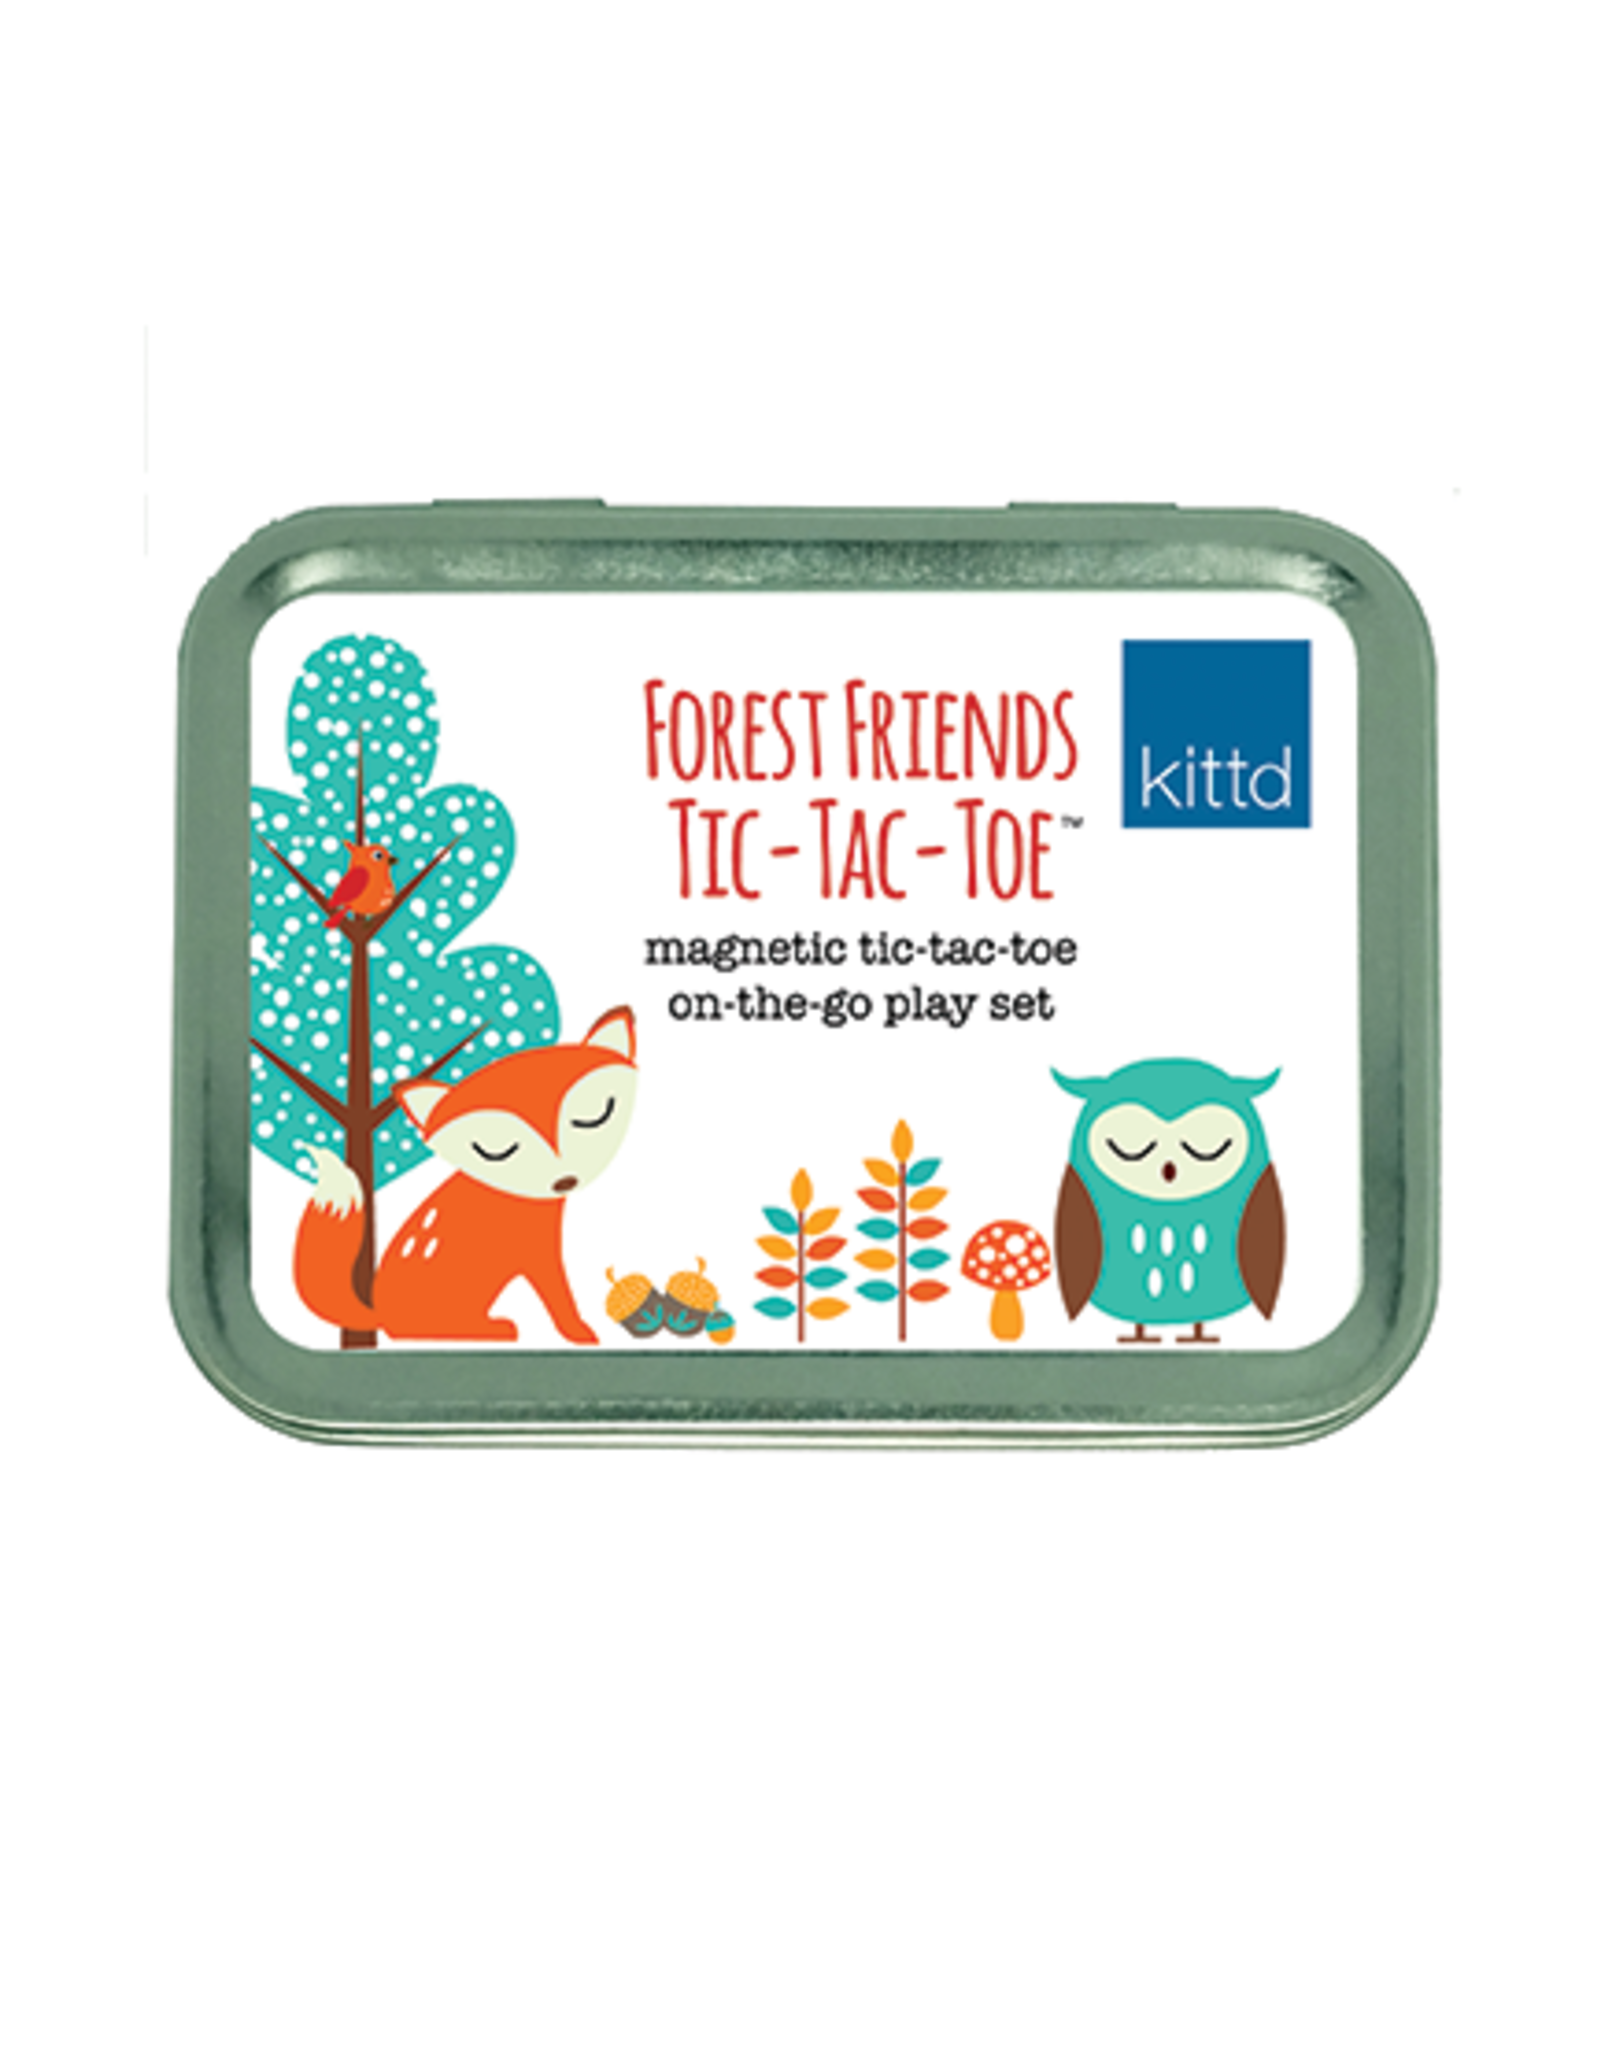 kittd Forest Friends Tic-Tac-Toe On-the-Go Kit